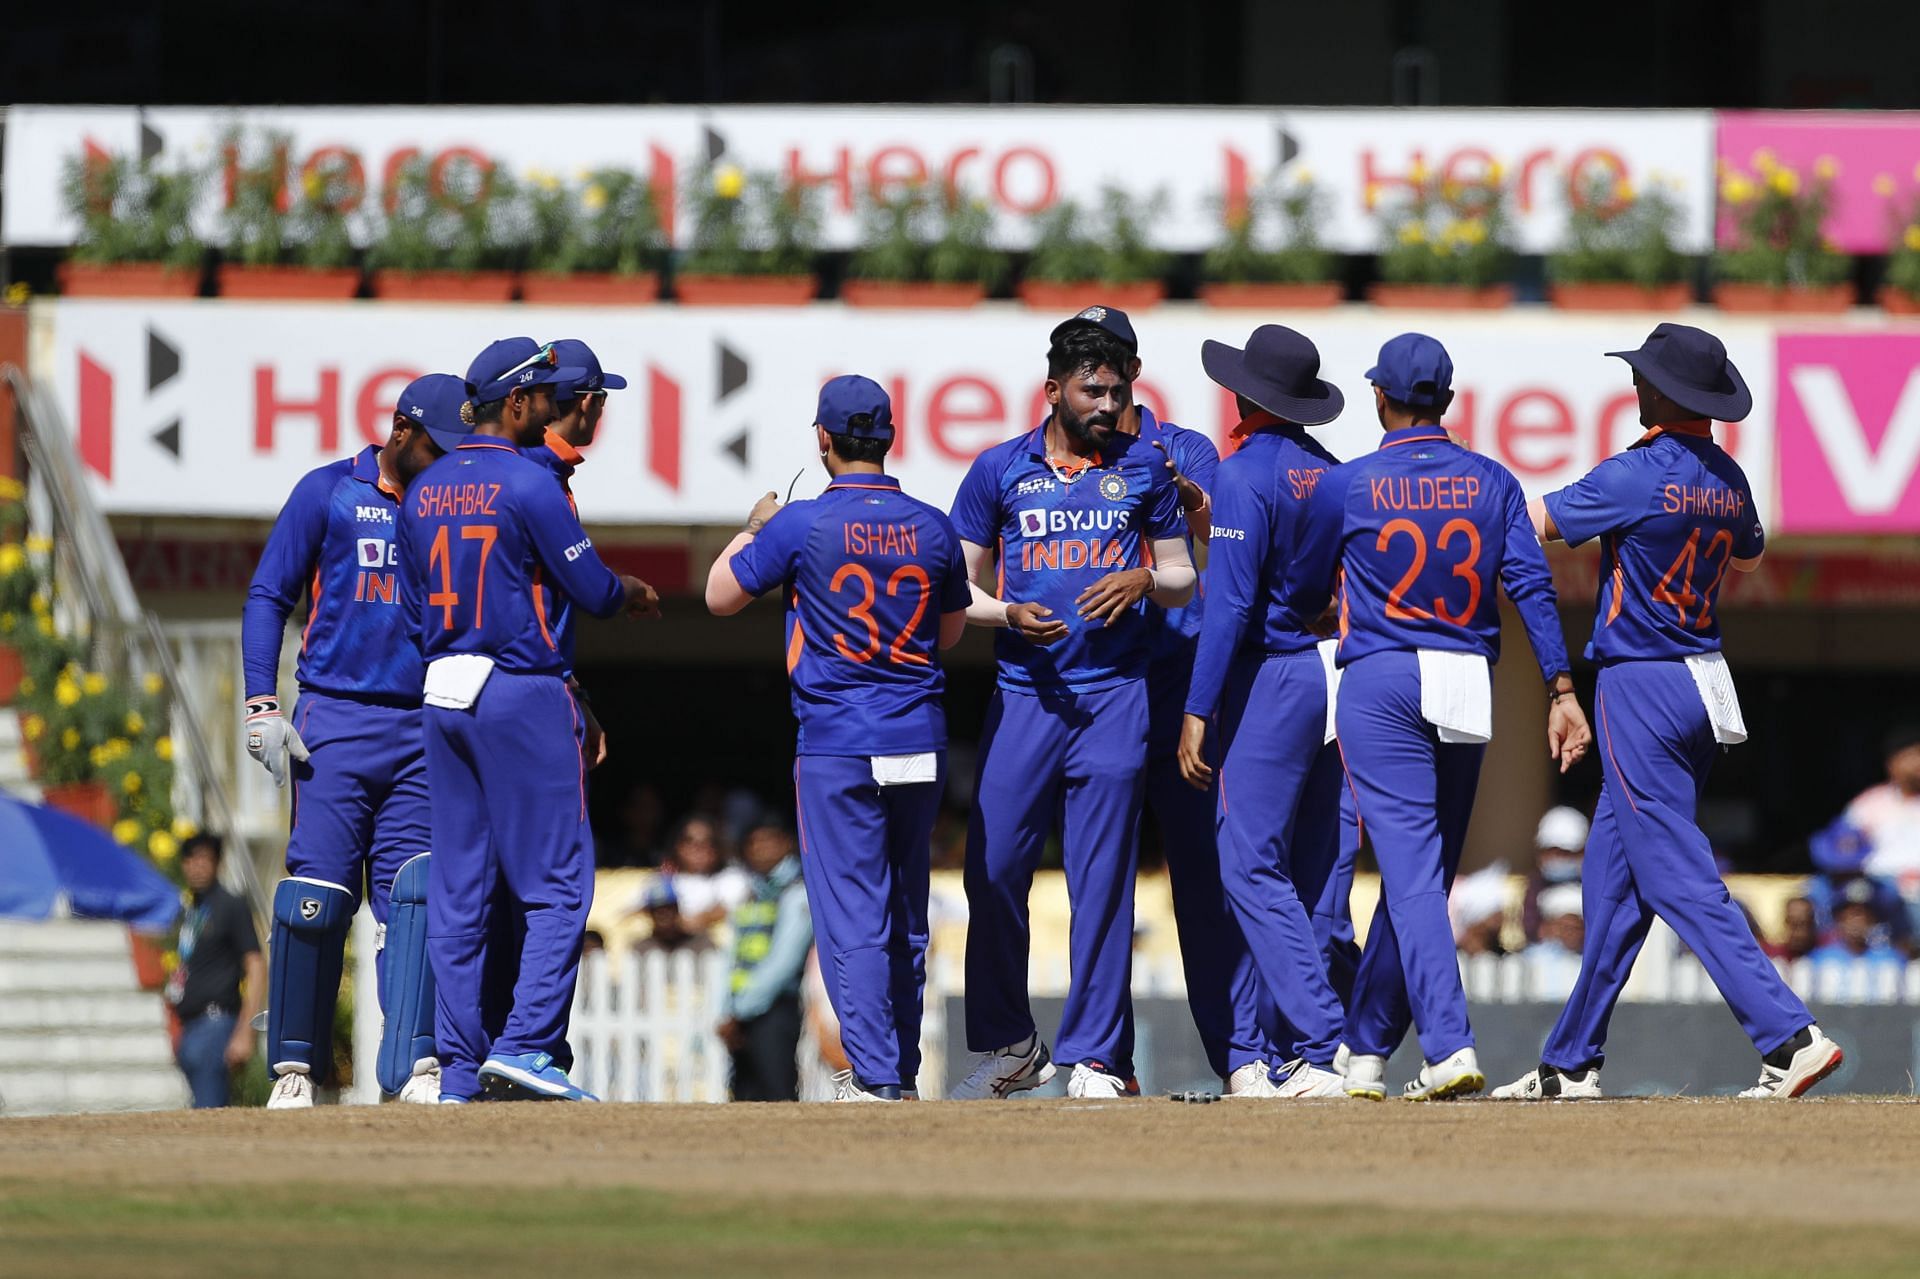 Indian cricket team. (Image Credits: Getty)